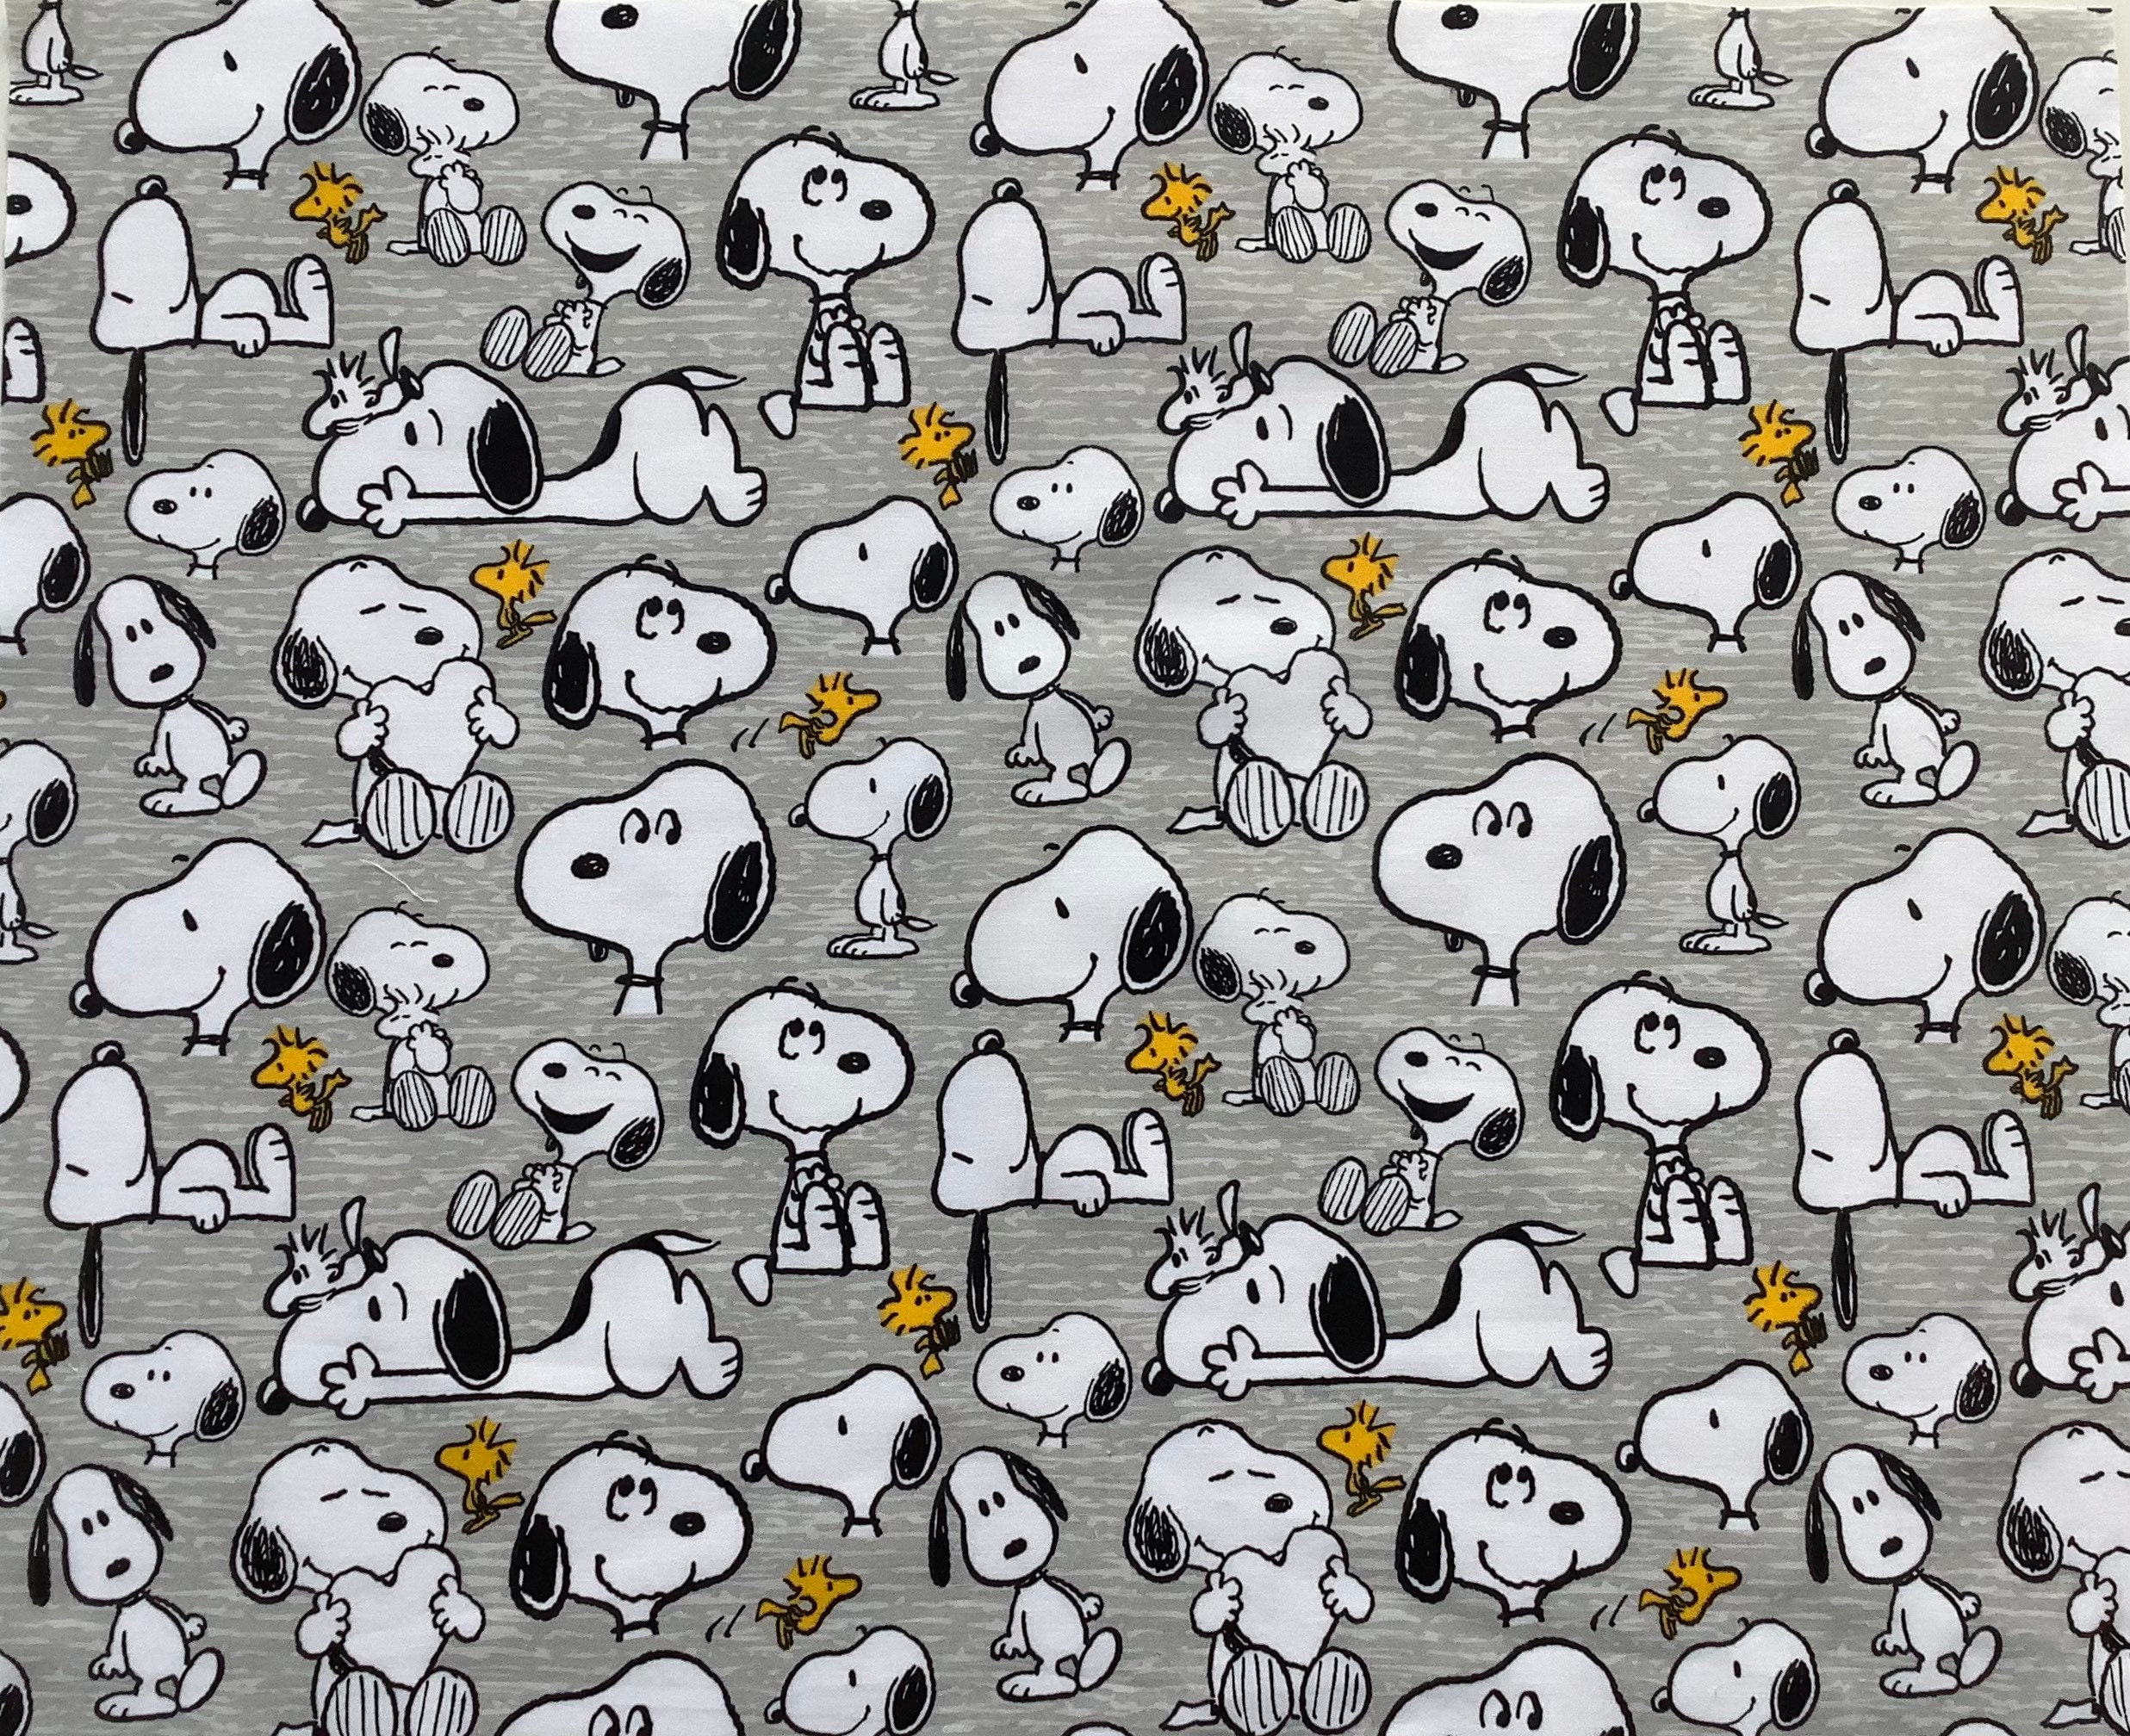 Snoopy Fabric FQ Remnant -  Hong Kong